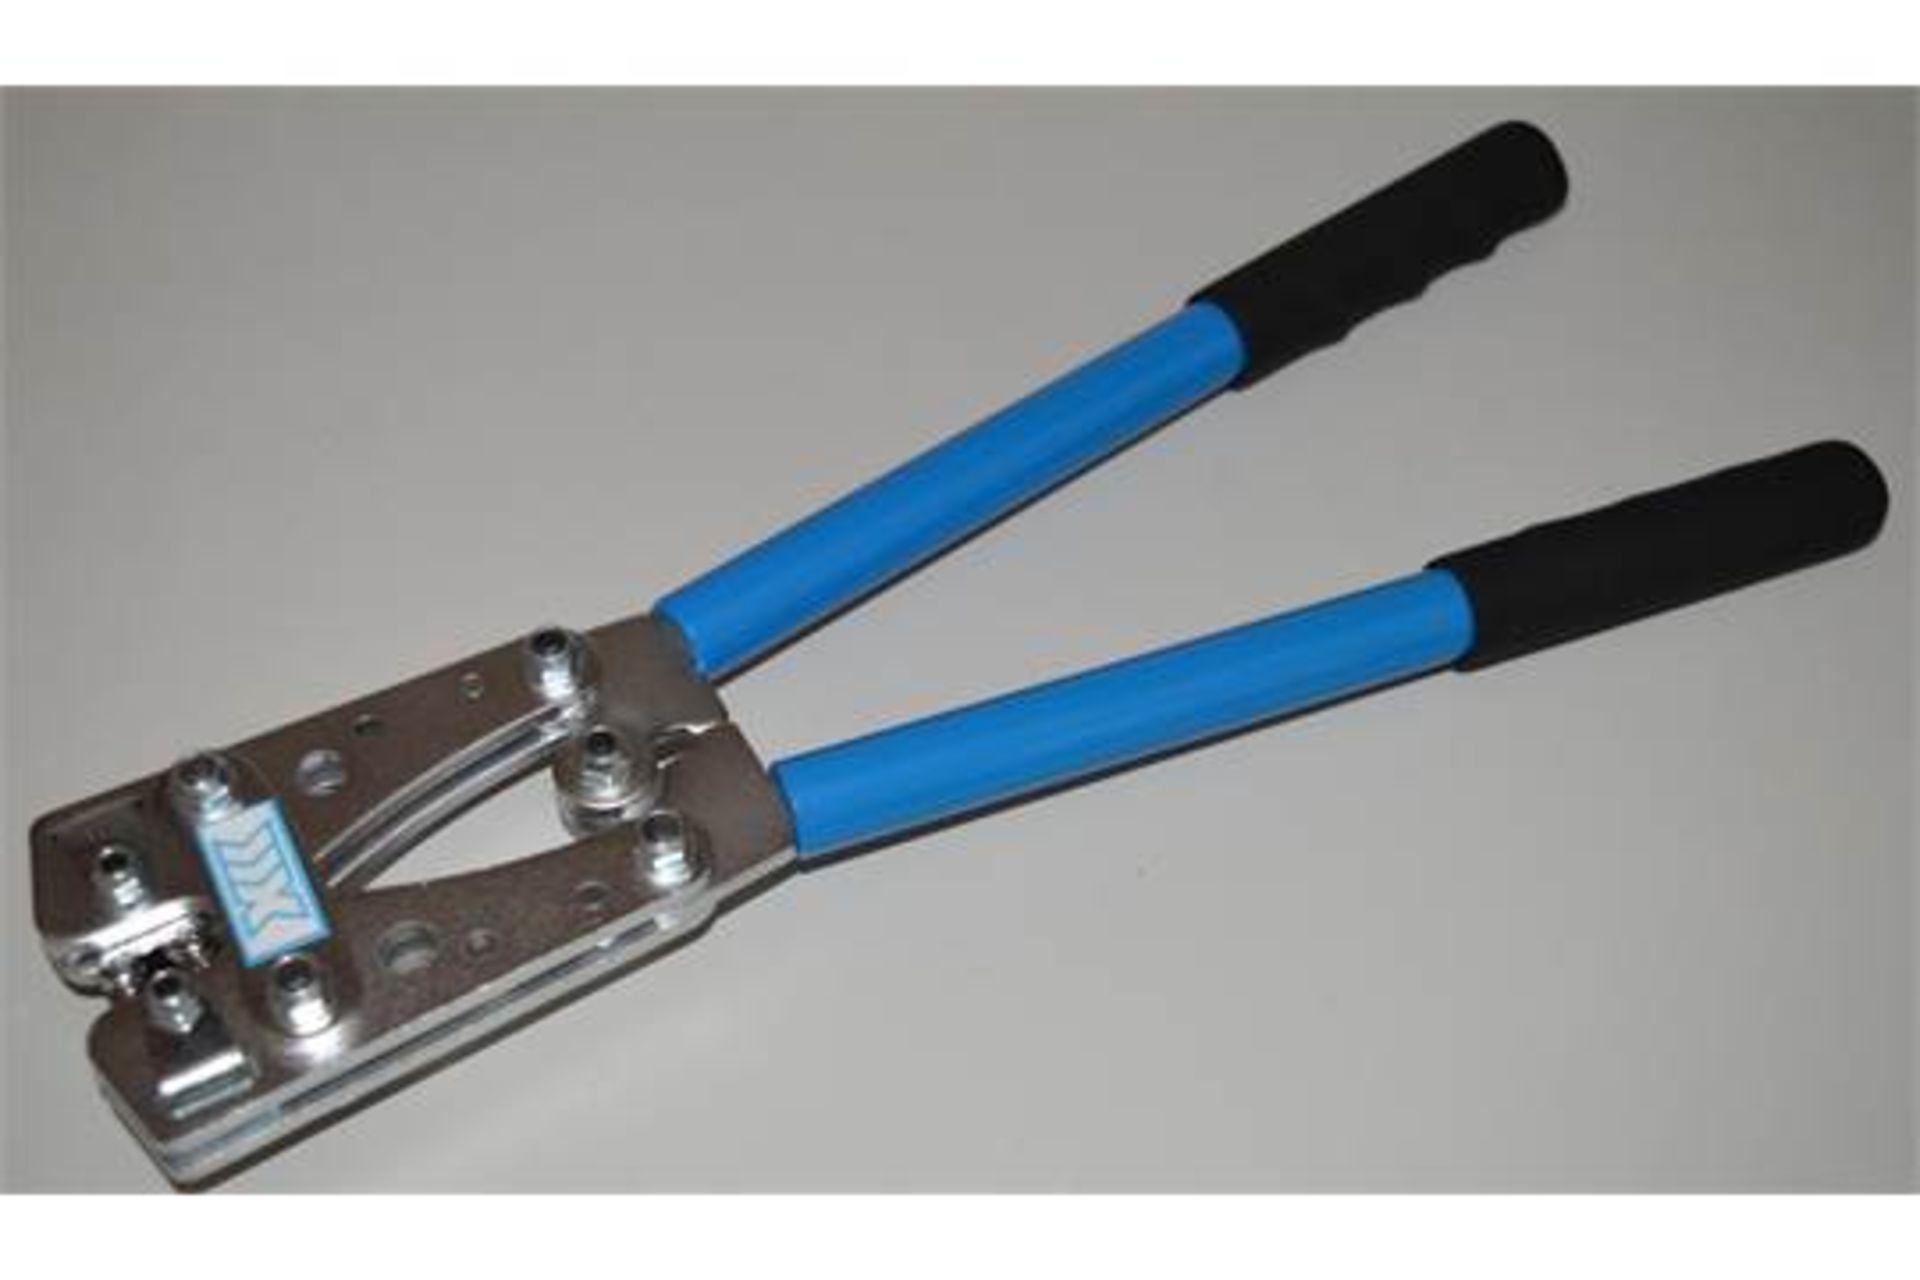 1 x HD Copper Tube Terminal Crimp Tool With Adjustable Hex - 38cm Length - XXX Branded - New and - Image 6 of 10